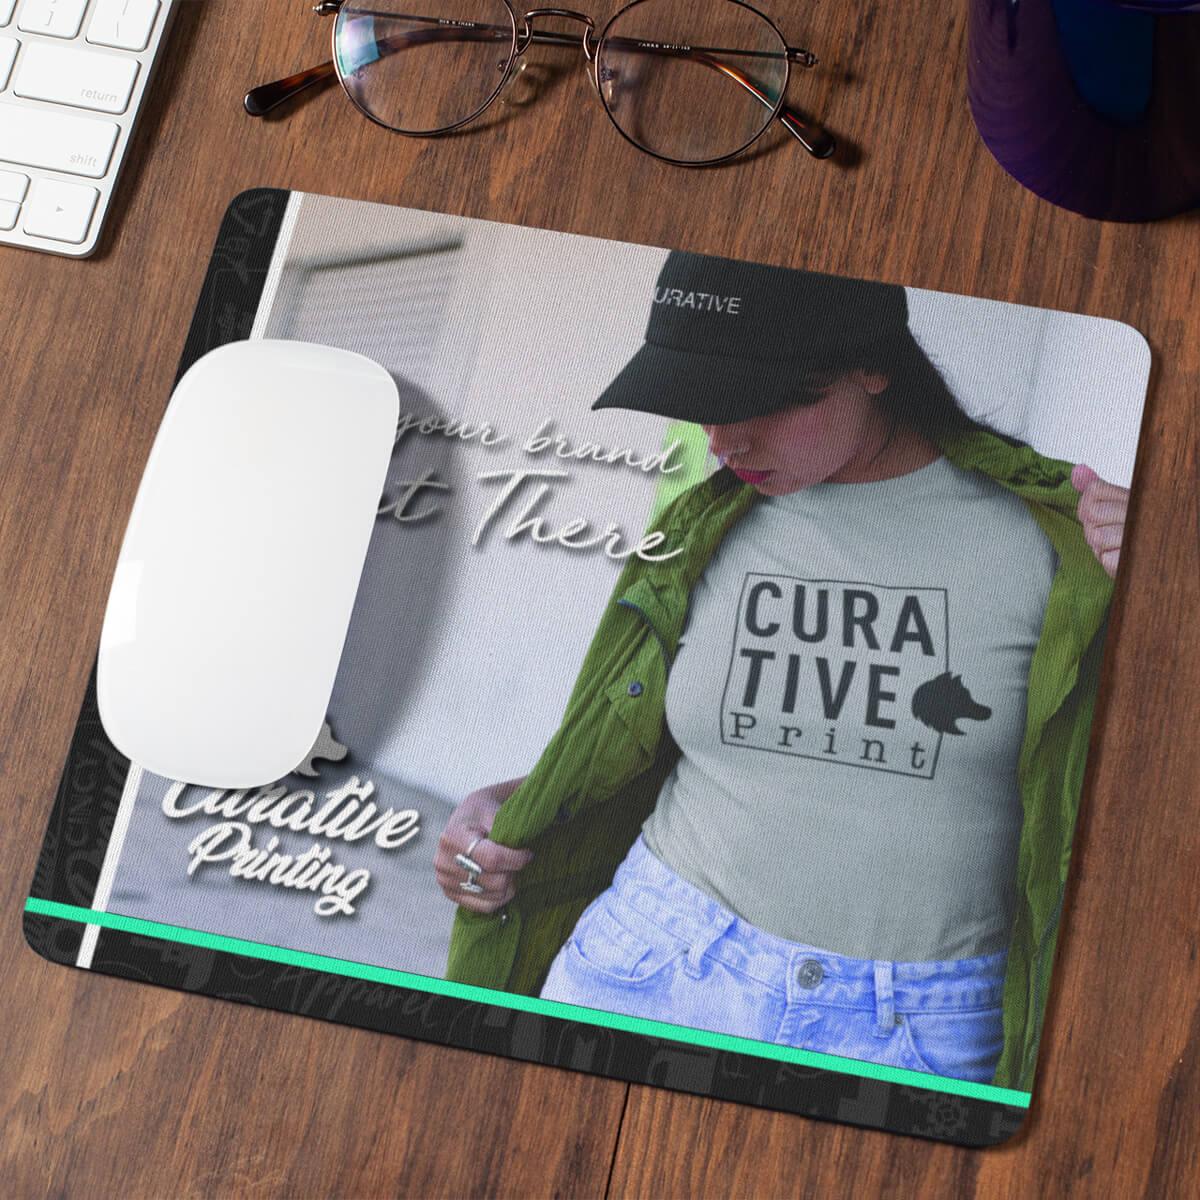 Computer desk with glasses and photo branded mouse pad promotional technology by curative printing